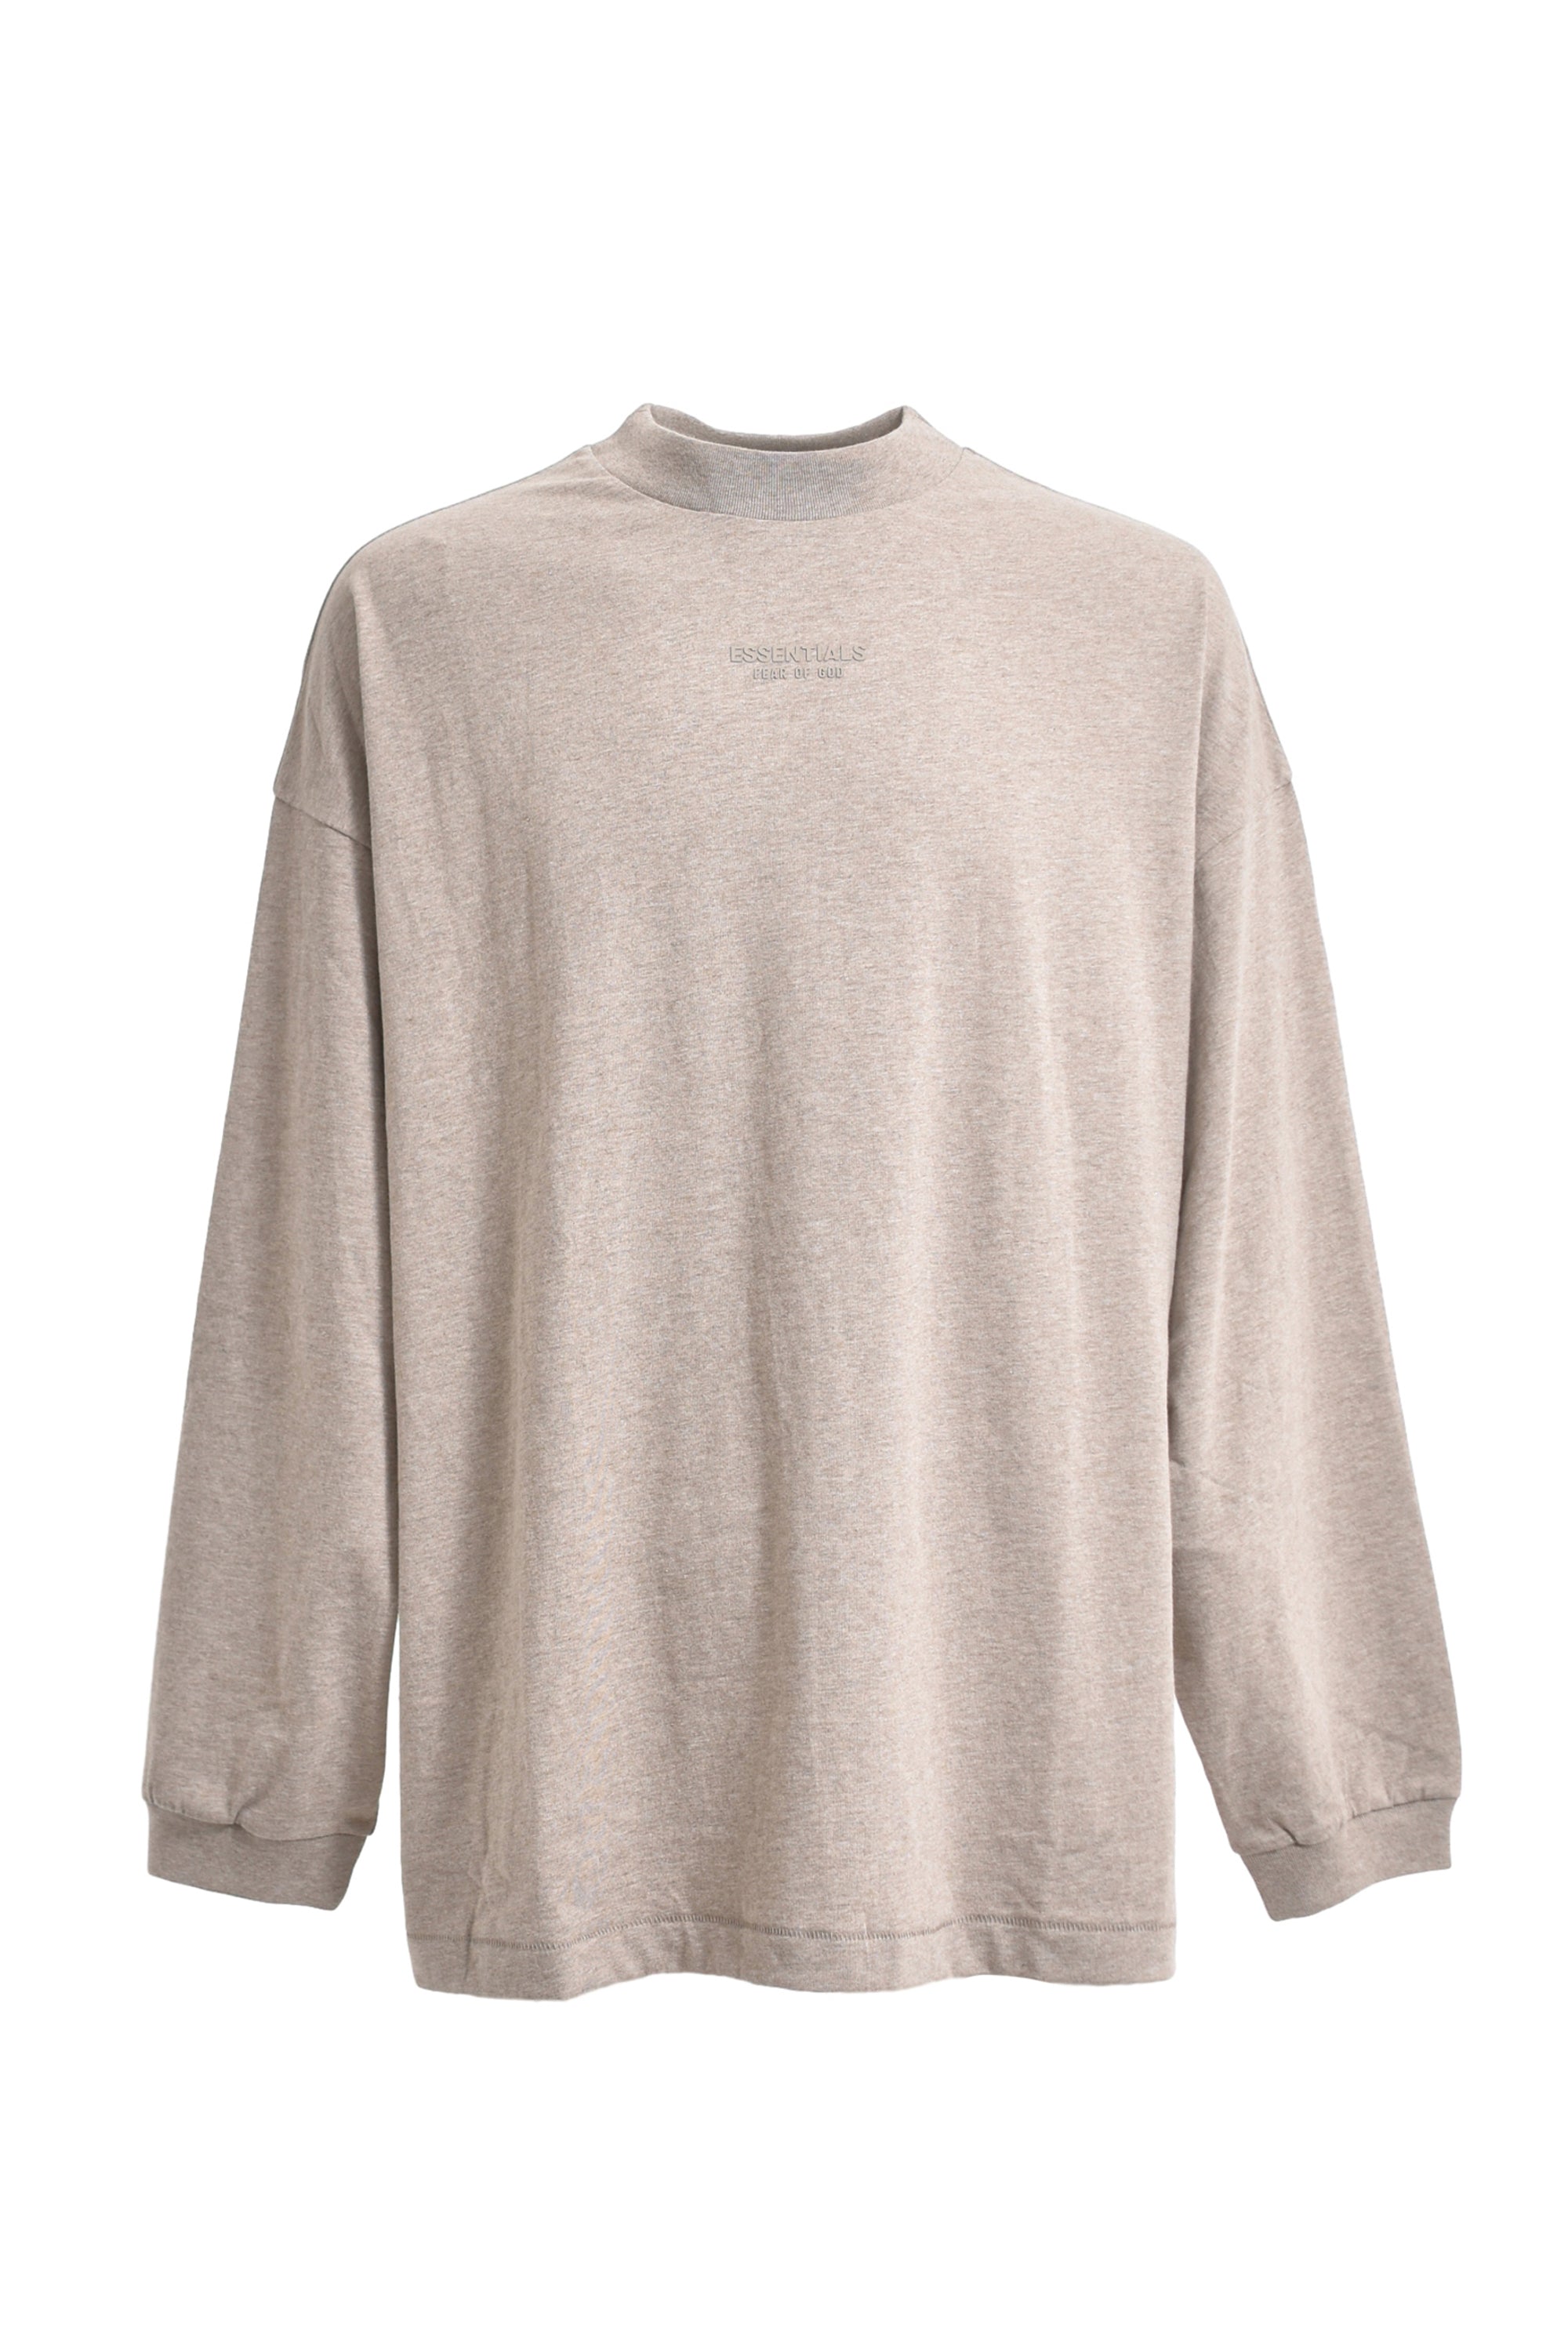 Fear of God Essentials Thermal Tee S